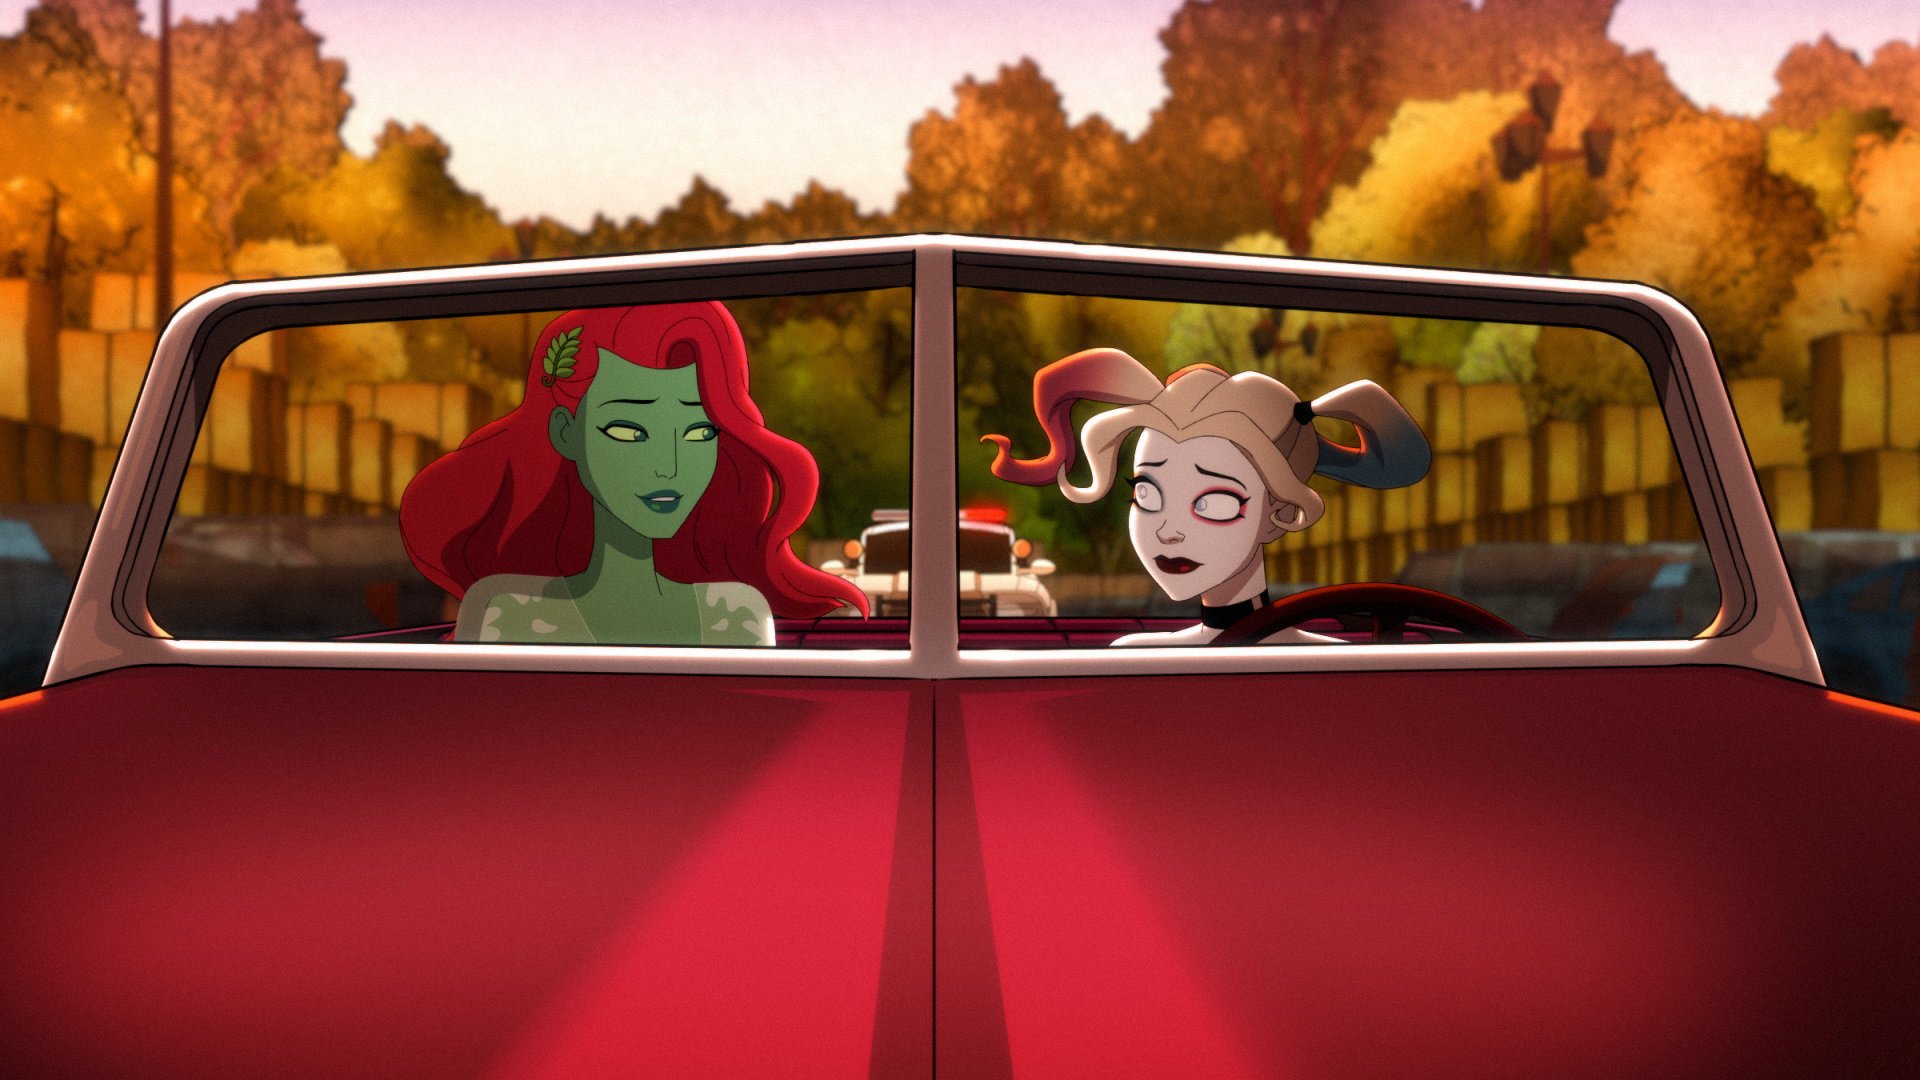 Poison Ivy and Harley Quinn escape Ivy's disastrous wedding in the Season 2 finale